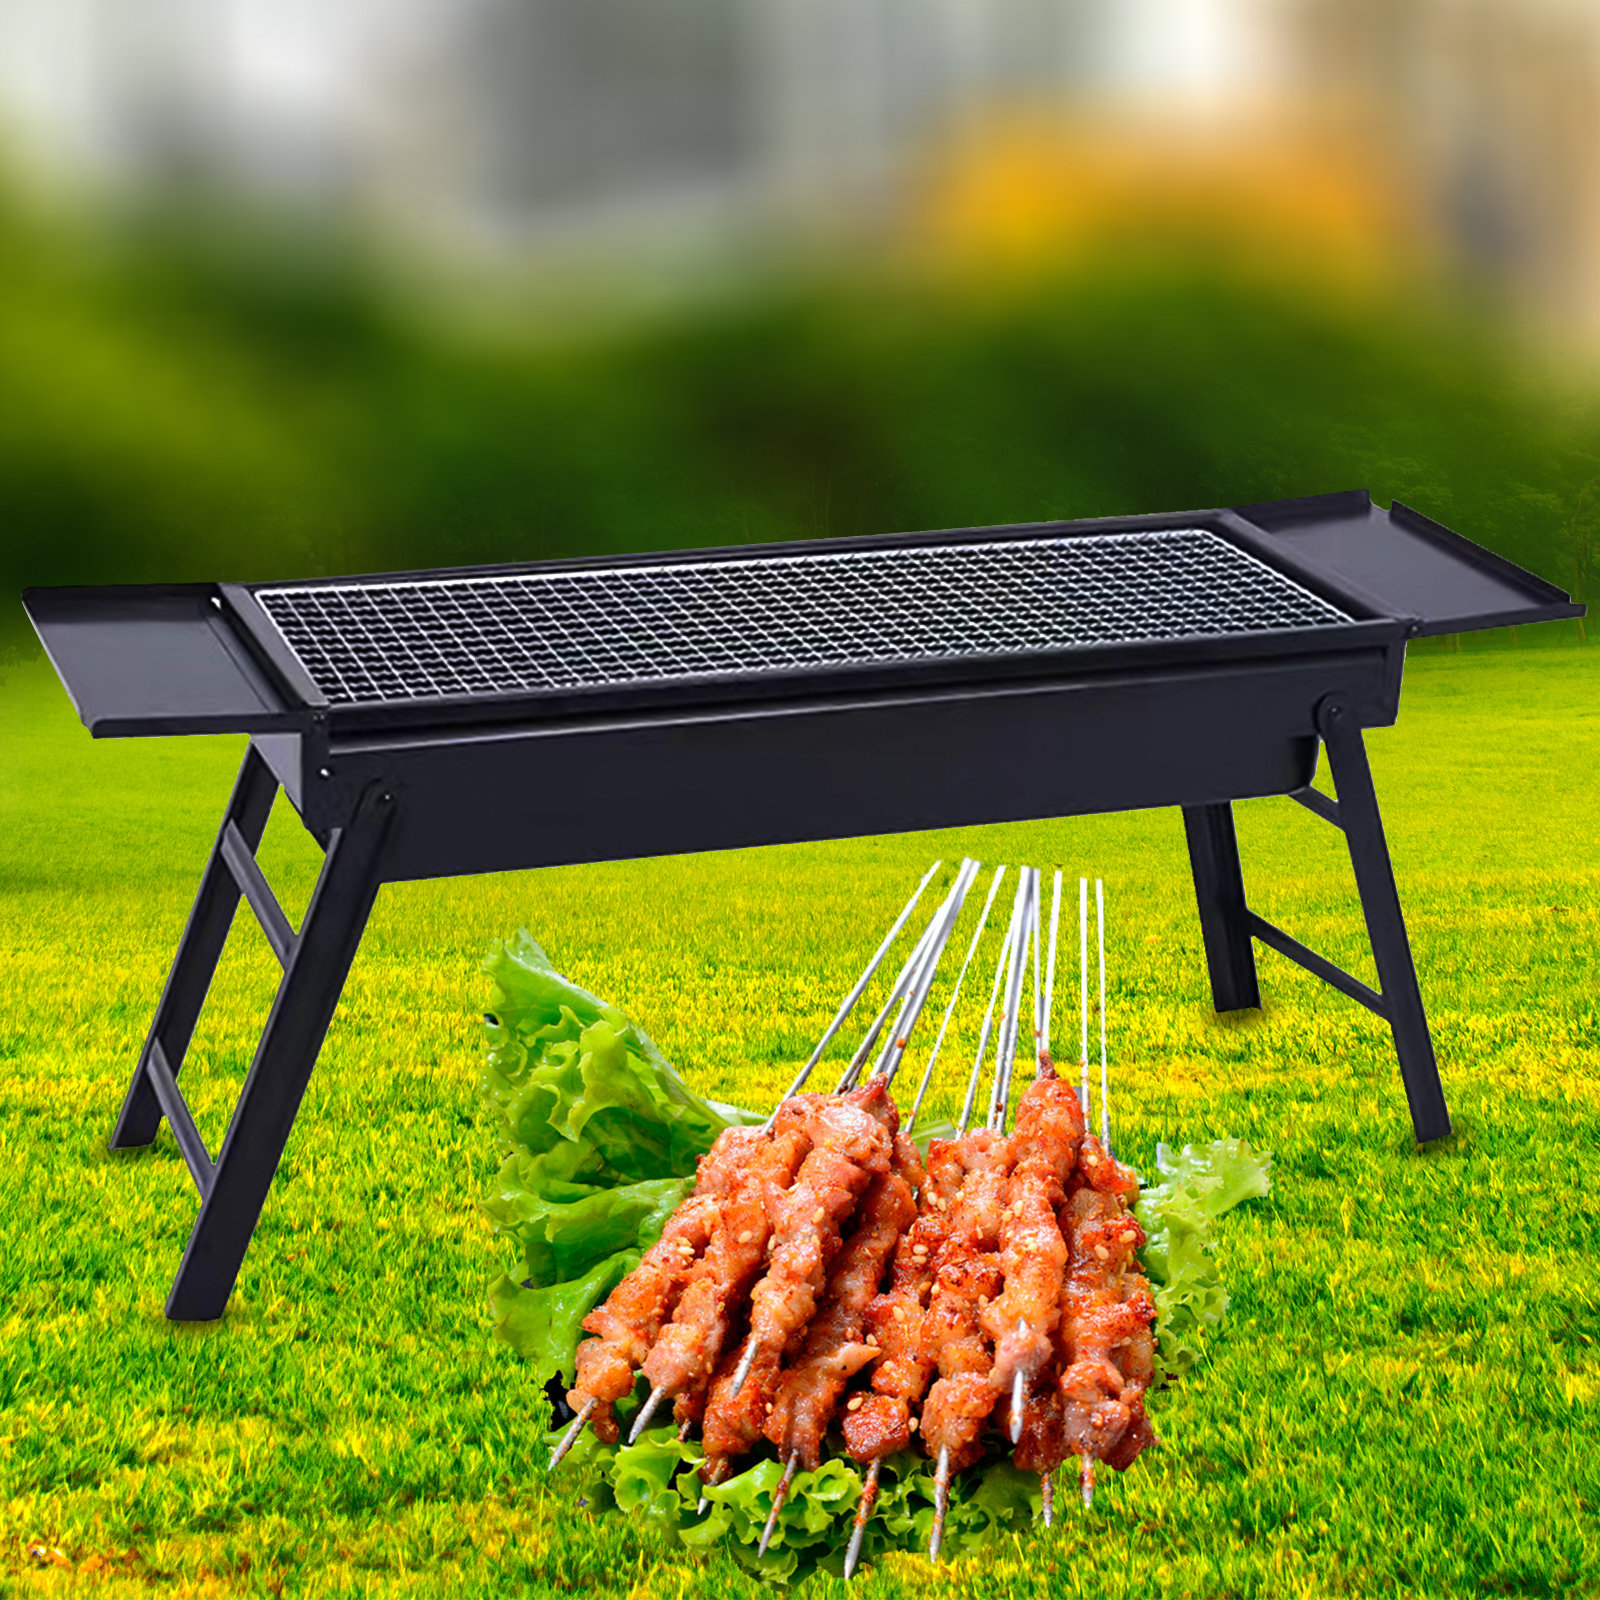 Uten Portable Barrel Charcoal BBQ Grill with Front Shelf, Carbon Steel Outdoor Barbecue Smoker, Size: One size, Black